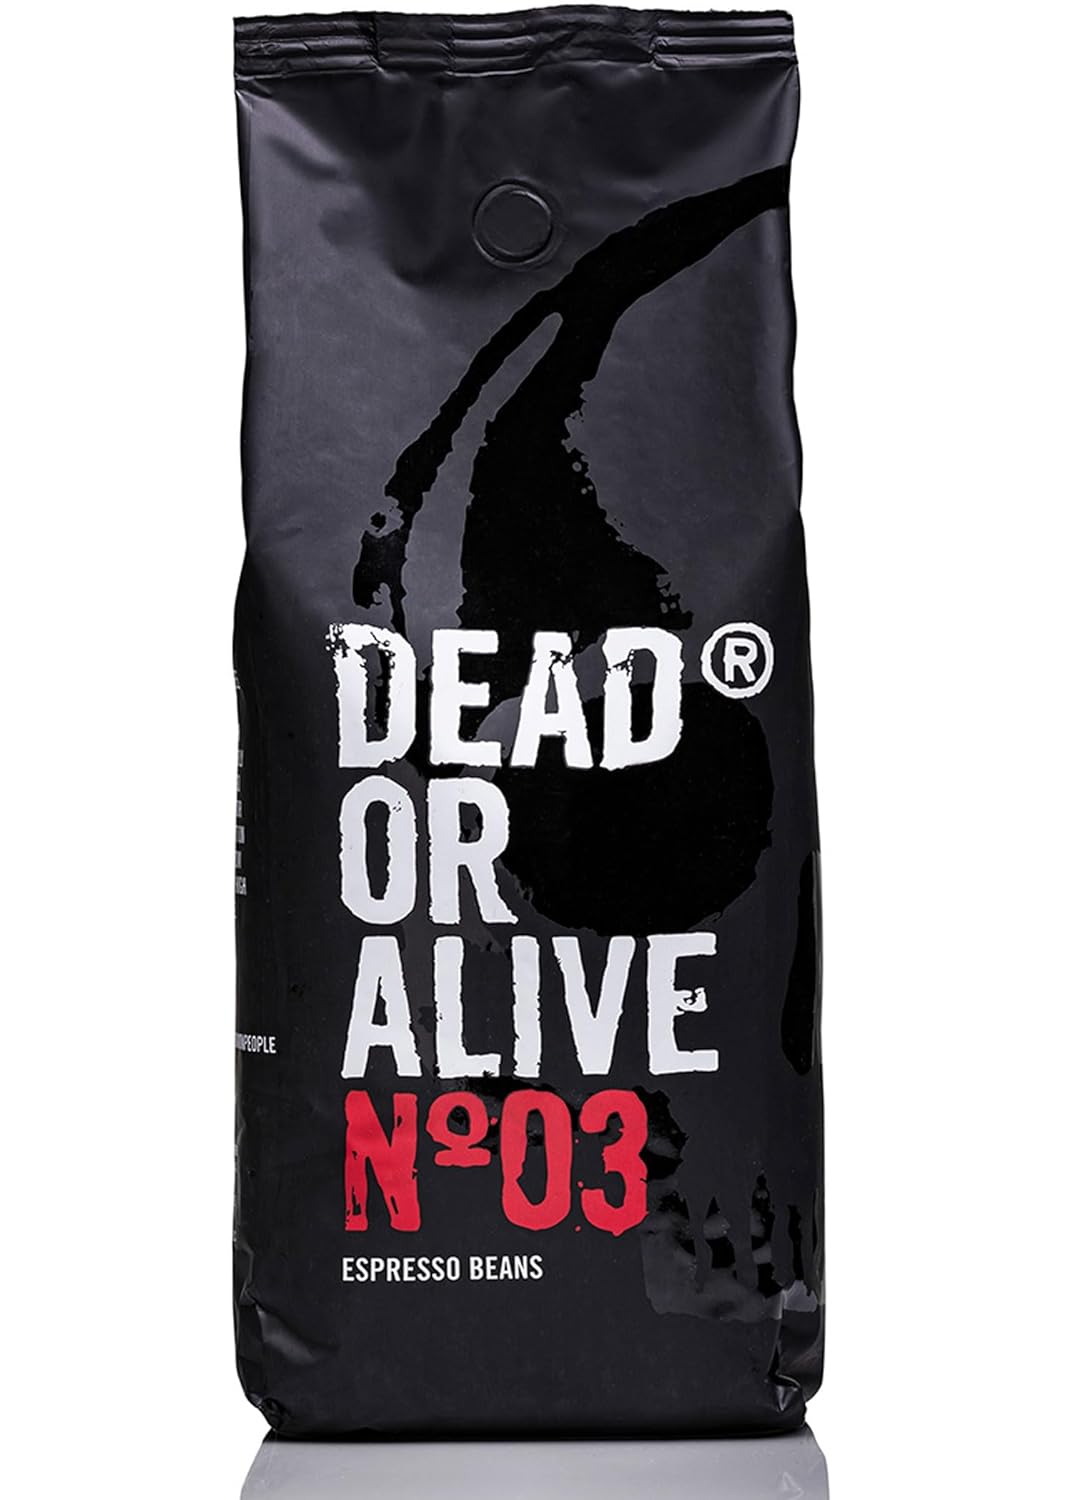 Dead or Alive Espresso No3 - Strong Espresso Beans 1 kg - 100% Robusta - Coffee Beans for Coffee Machine and Espresso Machine - HoHe Beans with Lots of Caffeine from Italy - Coffee Beans